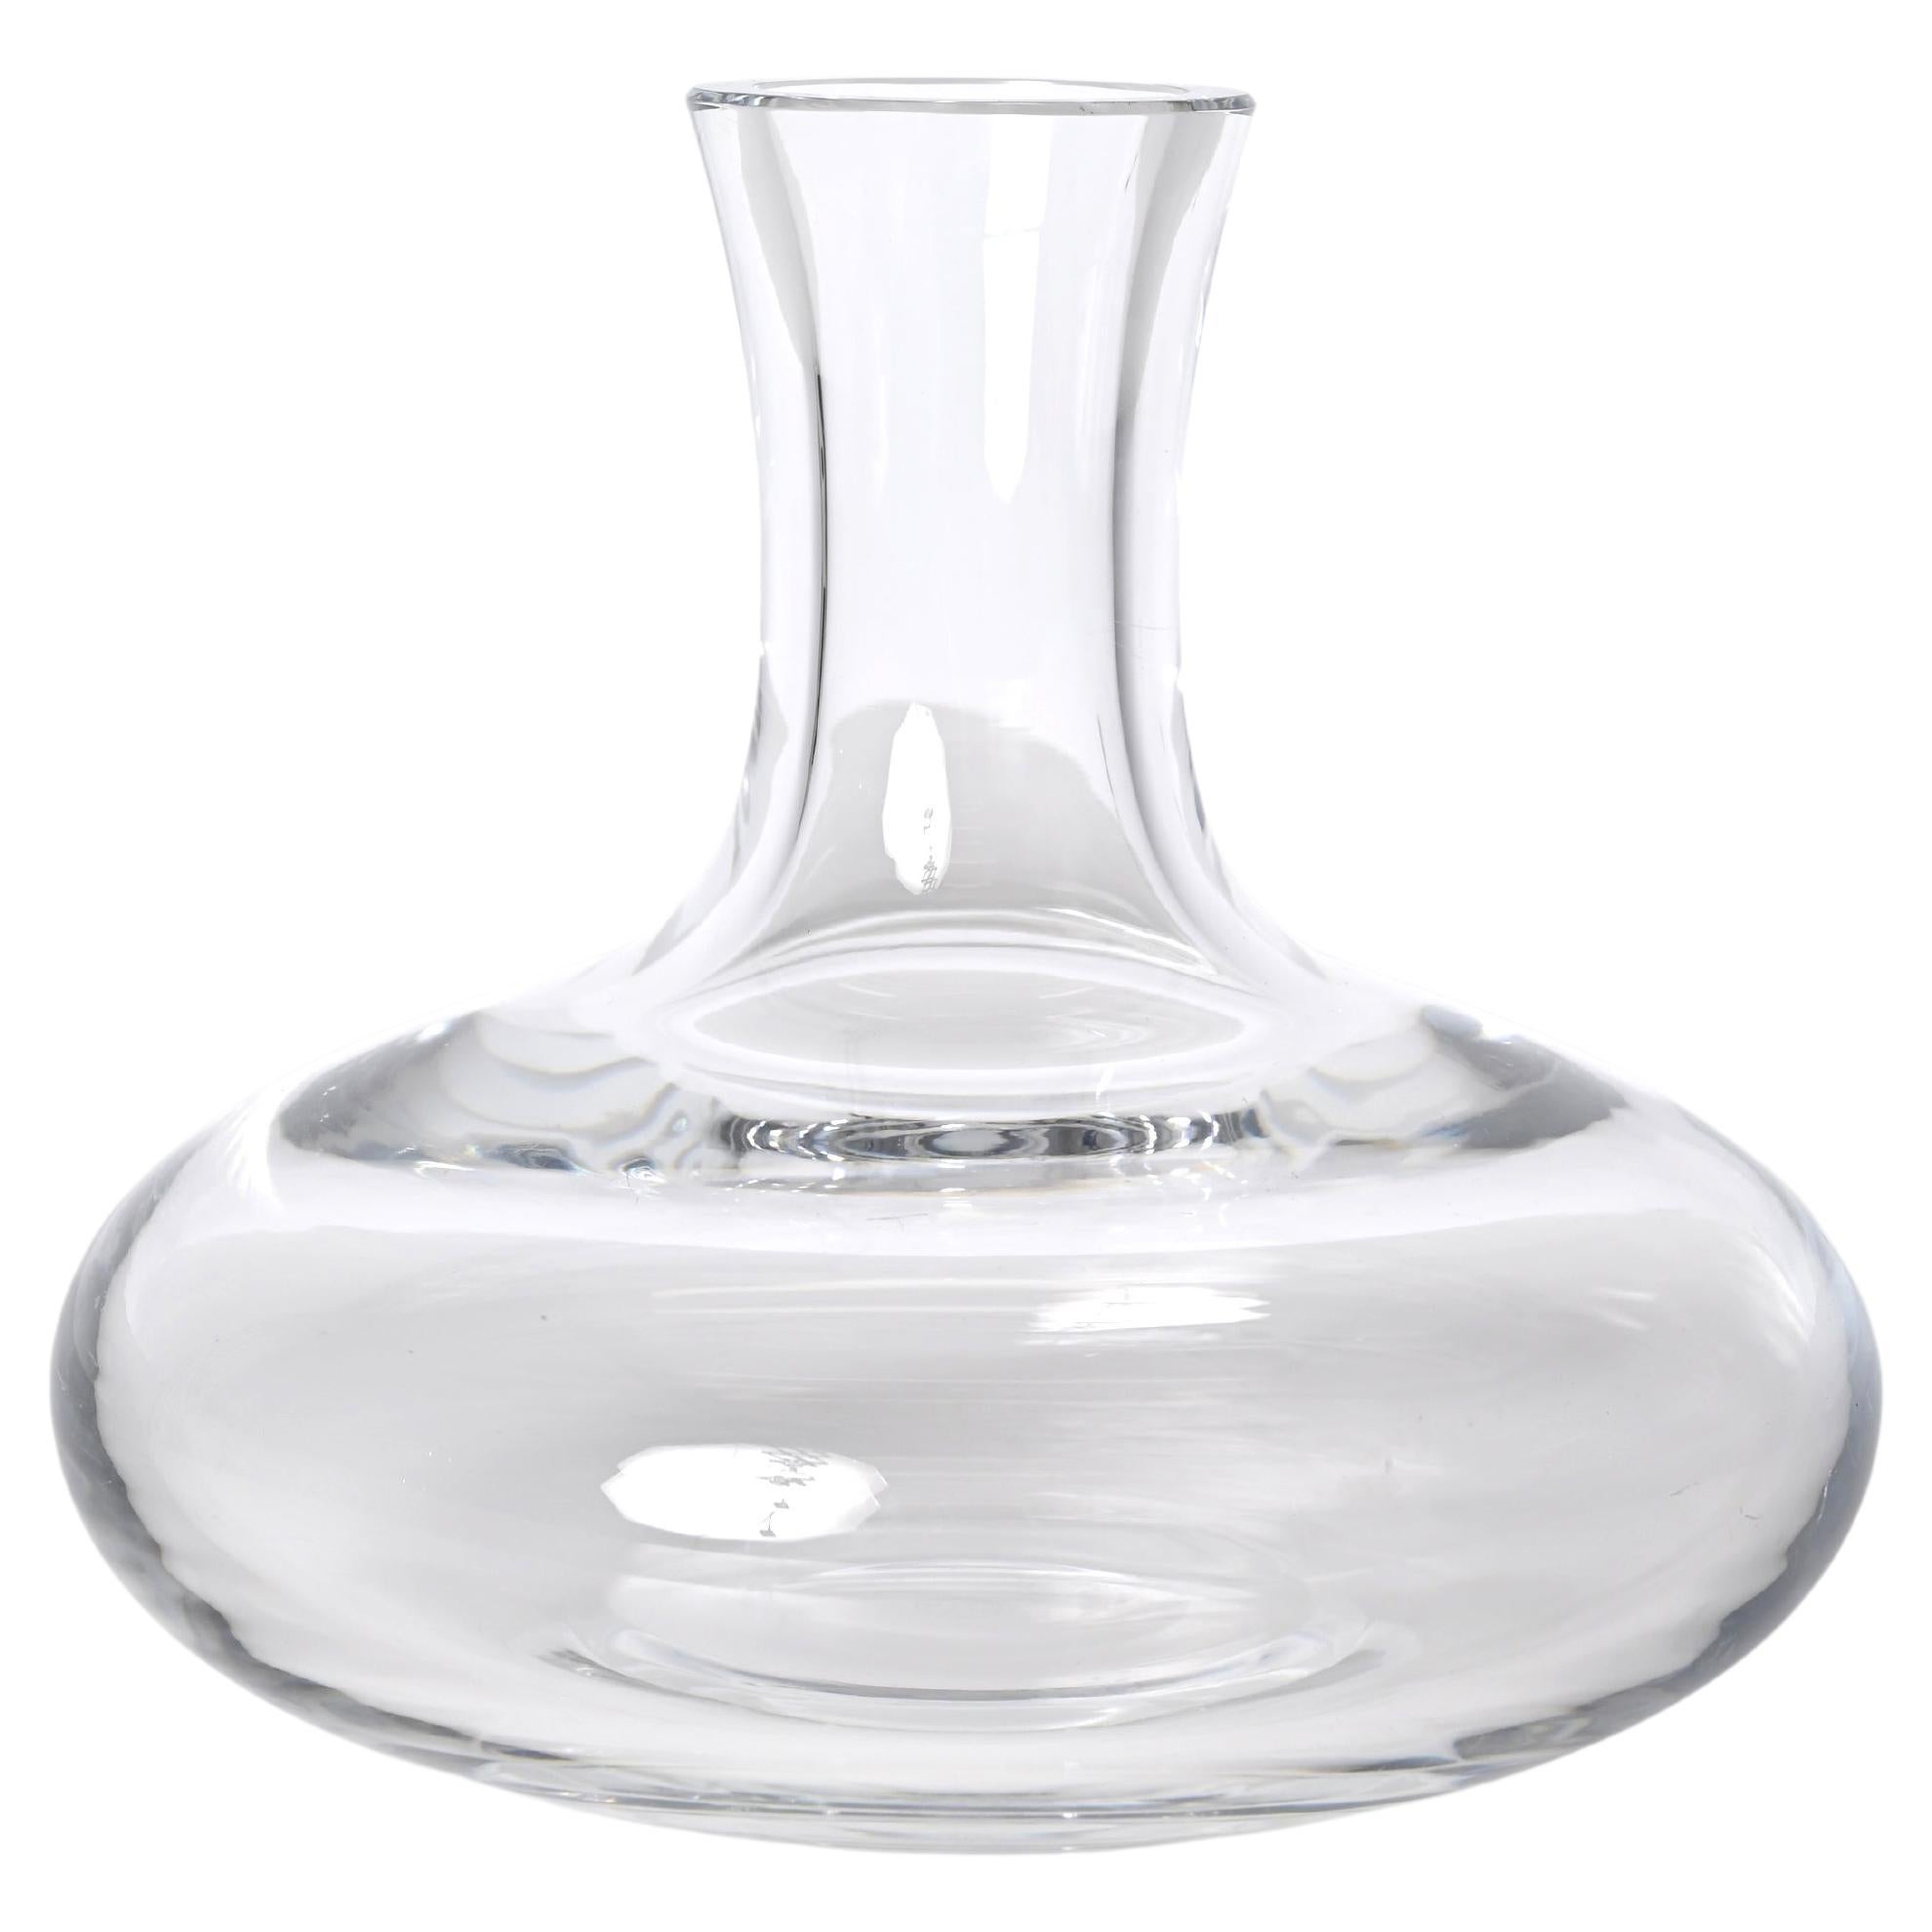 Beautiful Baccarat crystal wine decanter. Stamped on the bottom by the manufacture.
The quality of the crystal used by Baccarat is outstanding, known and admired throughout the world for centuries. 
The decanter is in fantastic conditions with no